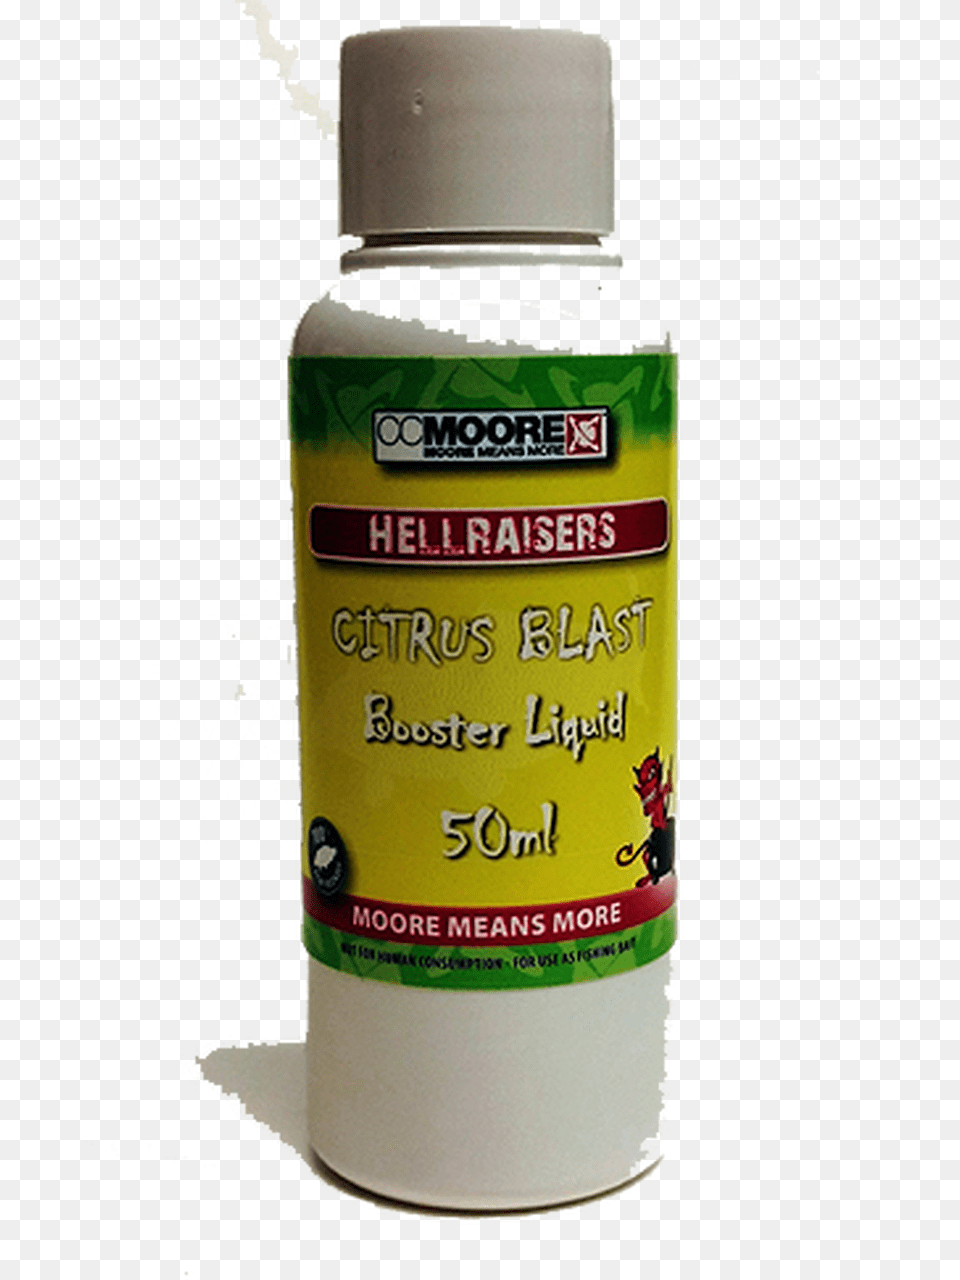 Cc Moore Citrus Blast Hellraiser Pop Up Booster Liquid Bottle, Tin, Can, Spray Can, Alcohol Free Png Download